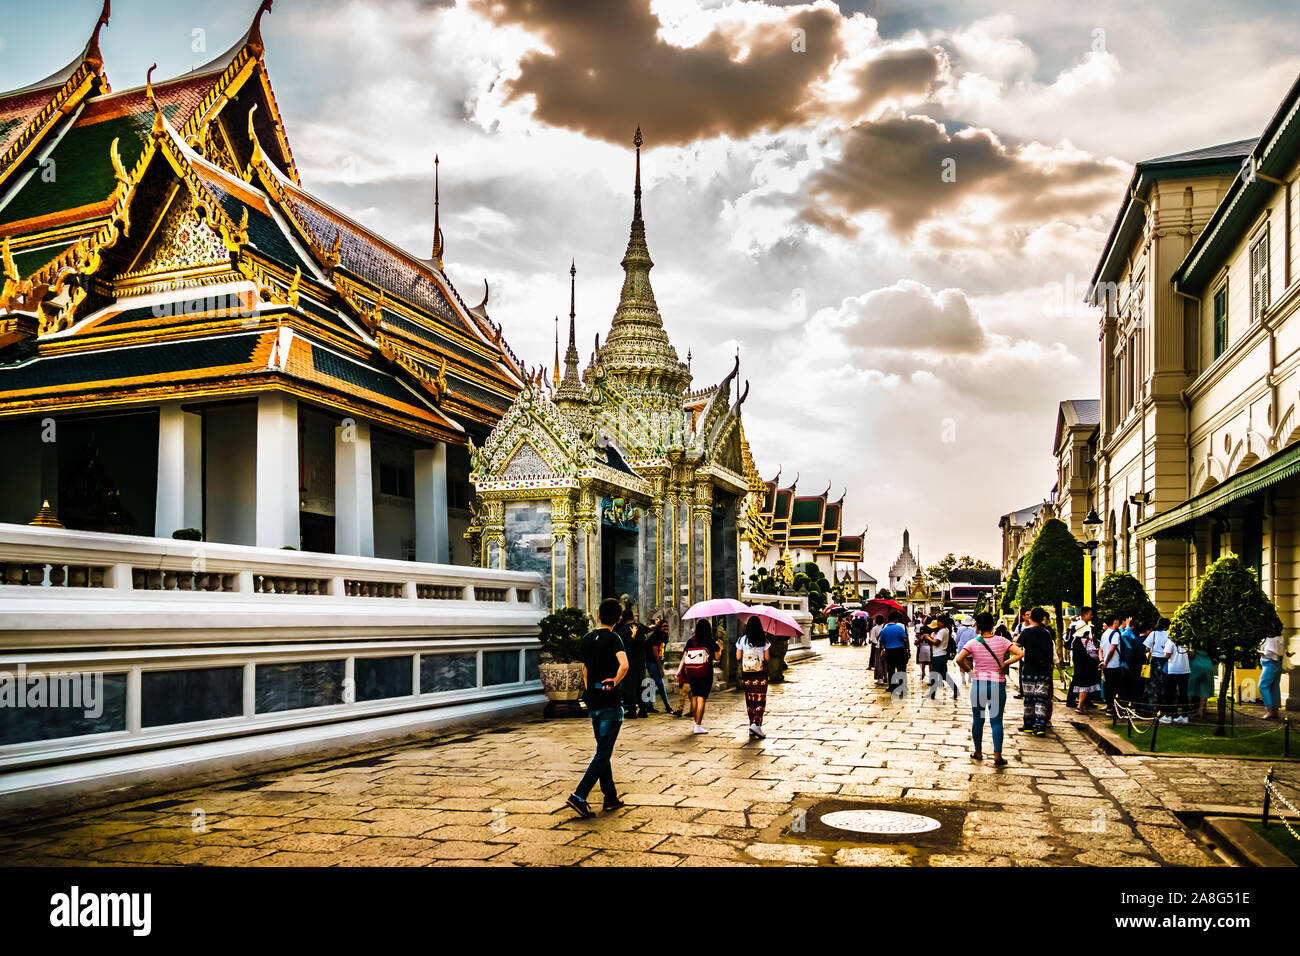 Bangkok, Thailand - Oct 29, 2019: Grand Palace built in 1782 and for 150 years the home of the Thai King. Stock Photo